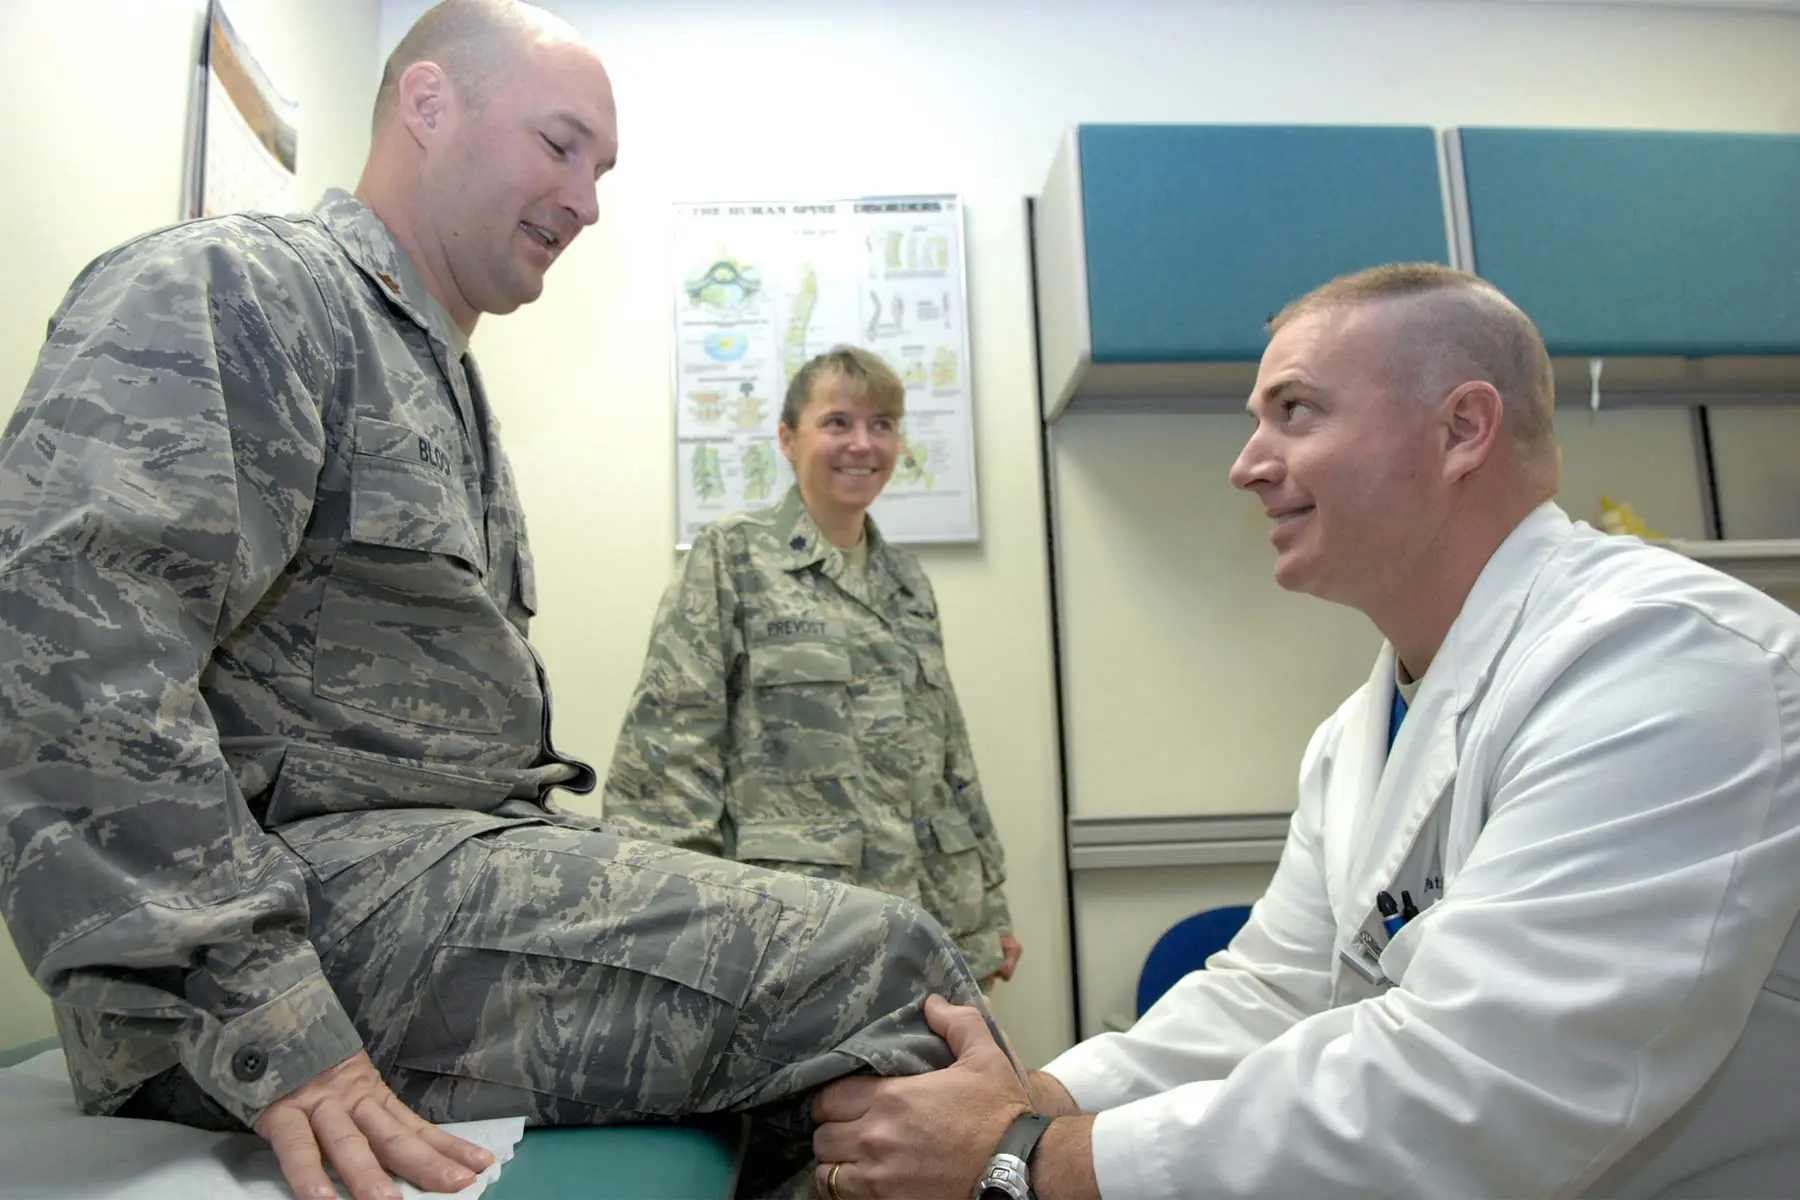 Patient Priority at Military Treatment Facilities ...